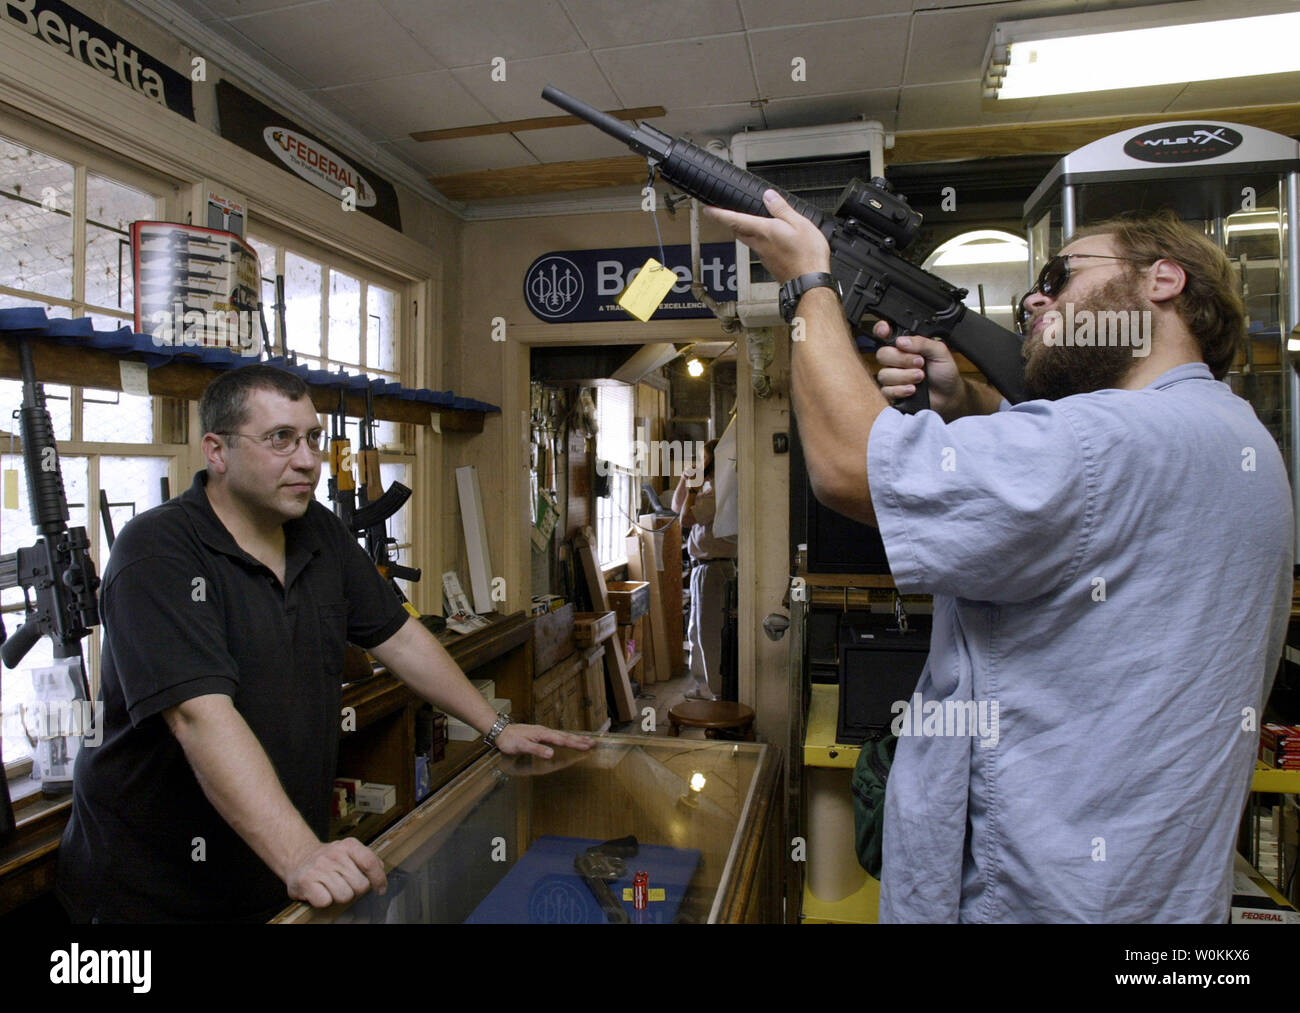 A customer (R) examines the Cold Match target gun as a salesman looks on at the Potomac Arms gun store in Alexandria, Virginia in a September 10, 2004 file photo. In the aftermath of the deadly Virginia Tech University rampage, in which 33 people were shot by student Cho Seung-Hui, many are raising questions about lax gun controls in the United States. (UPI Photo/Yuri Gripas/Files) Stock Photo